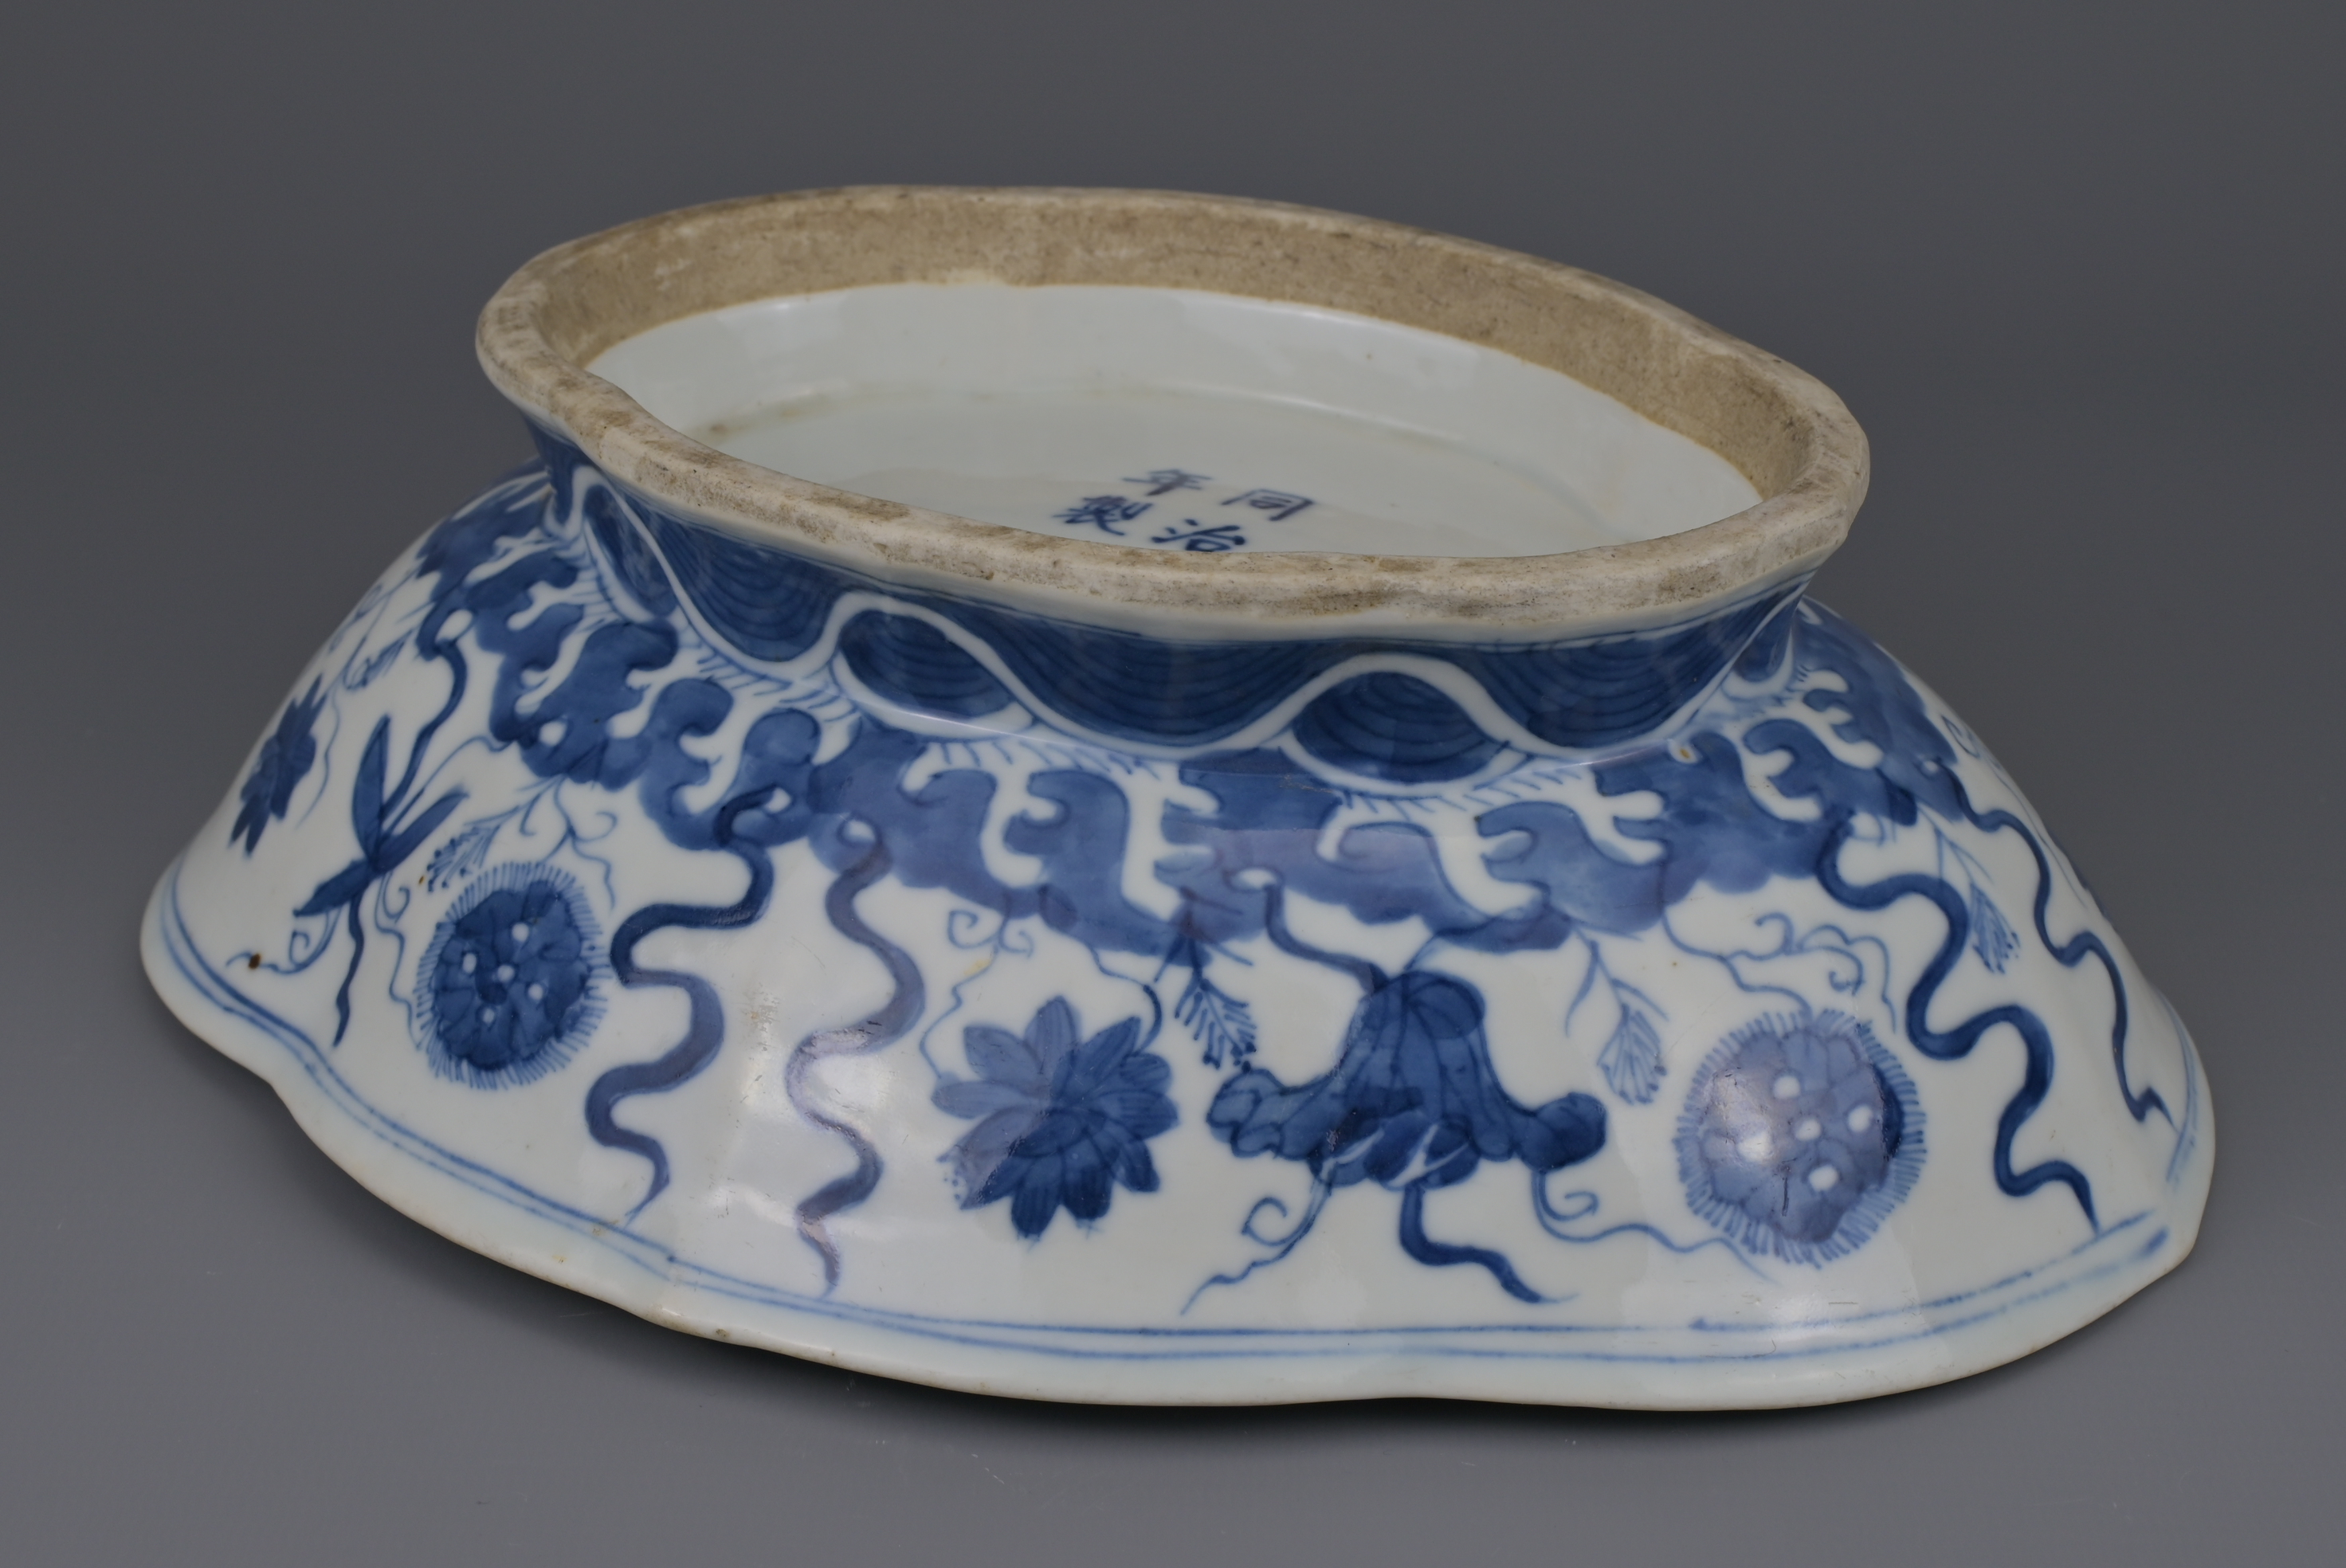 CHINESE BLUE AND WHITE LOBED PORCELAIN BOWL, TONGZHI MARK AND PERIOD, 19th CENTURY - Image 9 of 10